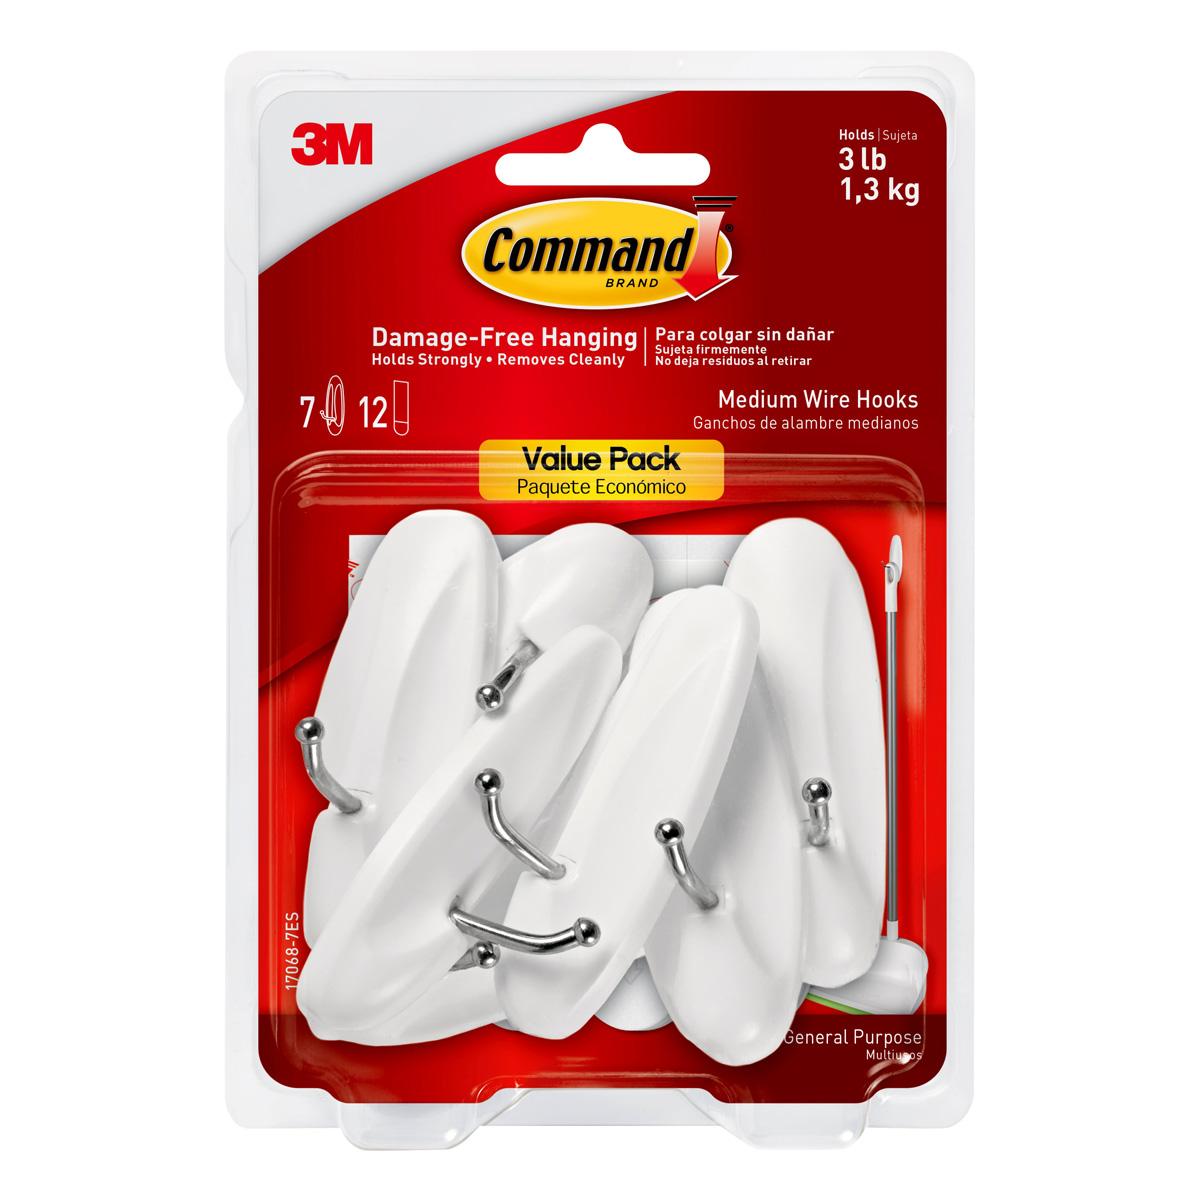 7 Command Wire Hooks Value Pack for $3.19